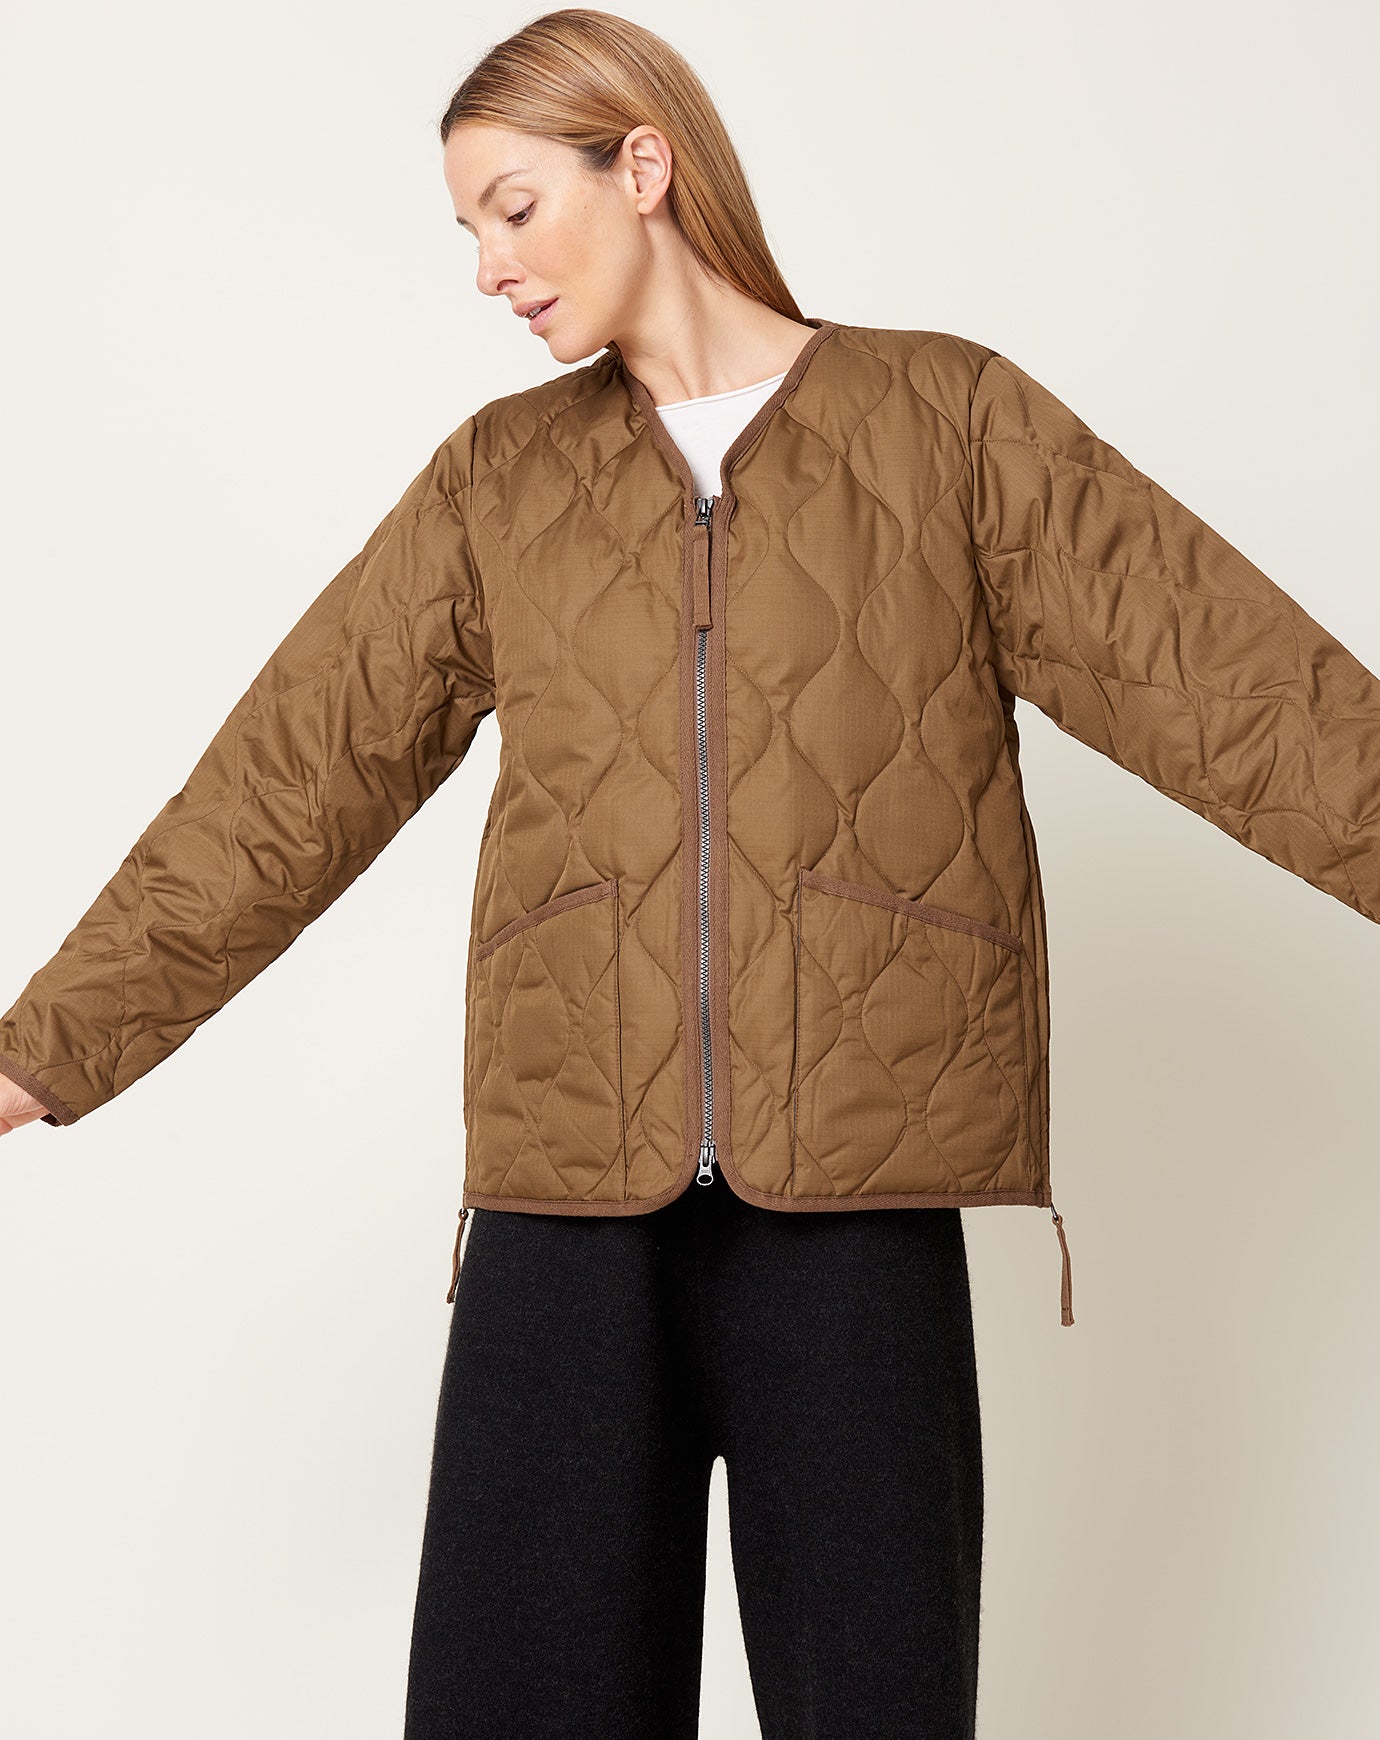 Taion Military Zip V Neck Down Jacket in Light Brown